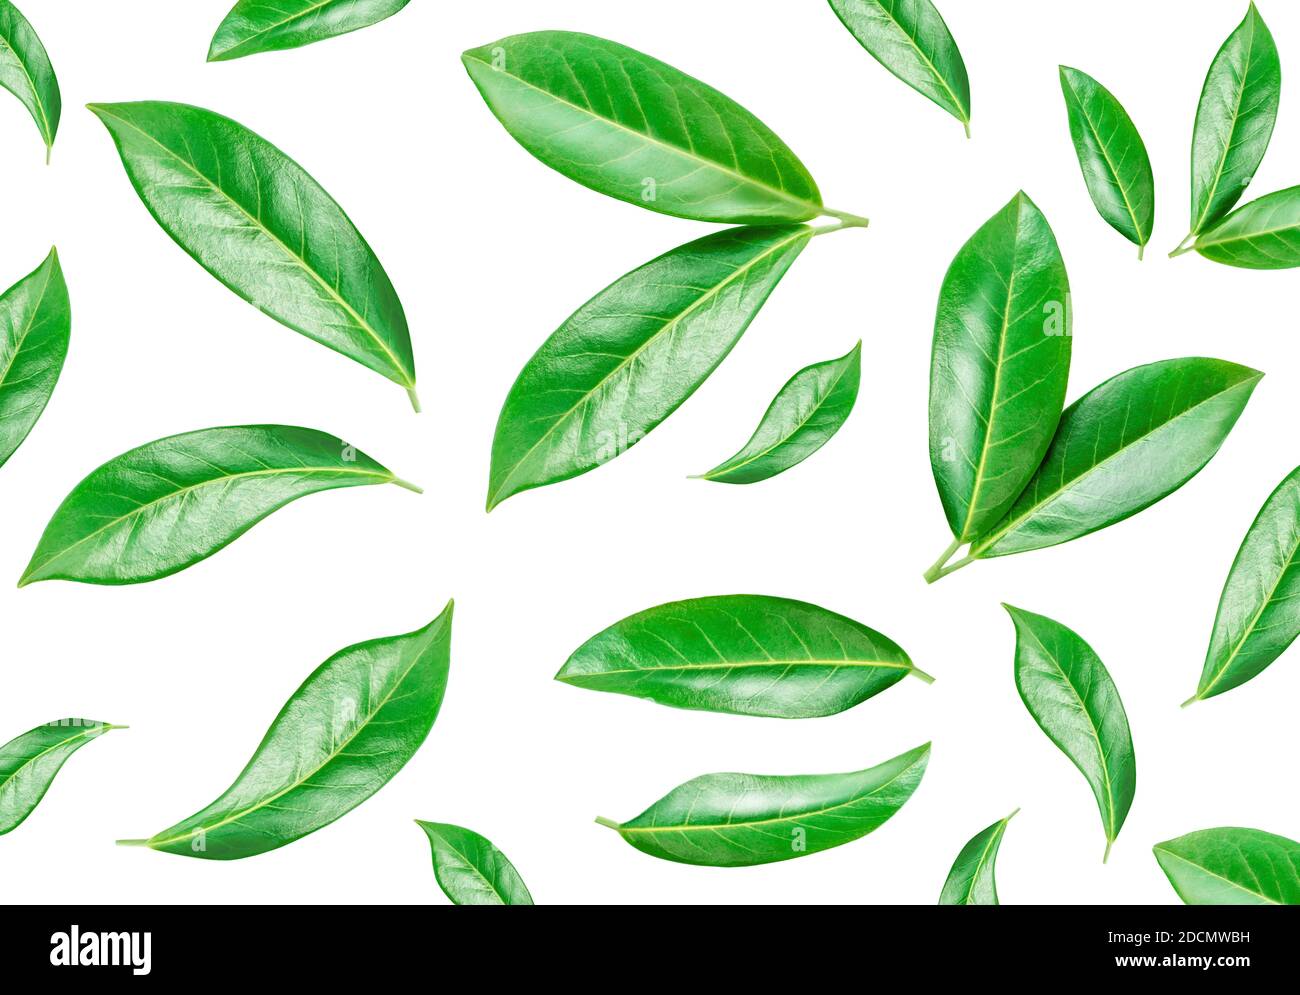 Citrus leaf Pattern. Green Orange leaves isolated on a white background. Top view. Flat lay Stock Photo